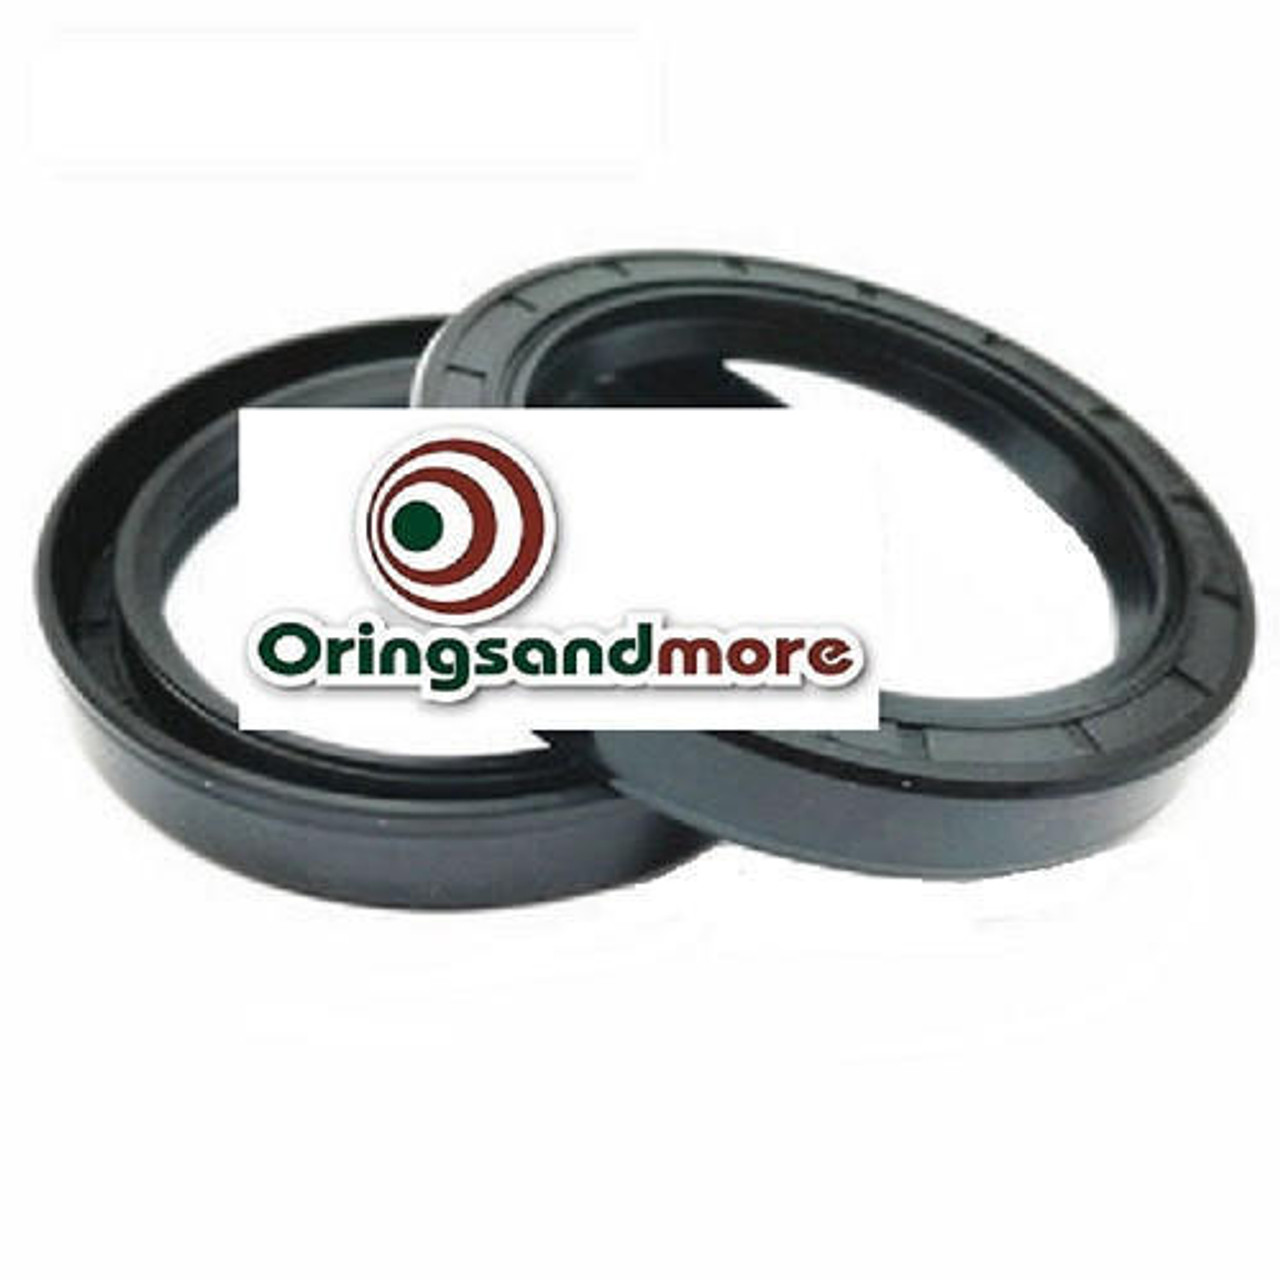 Metric Oil Shaft Seal 48 x 80 x 10mm Double Lip   Price for 1 pc